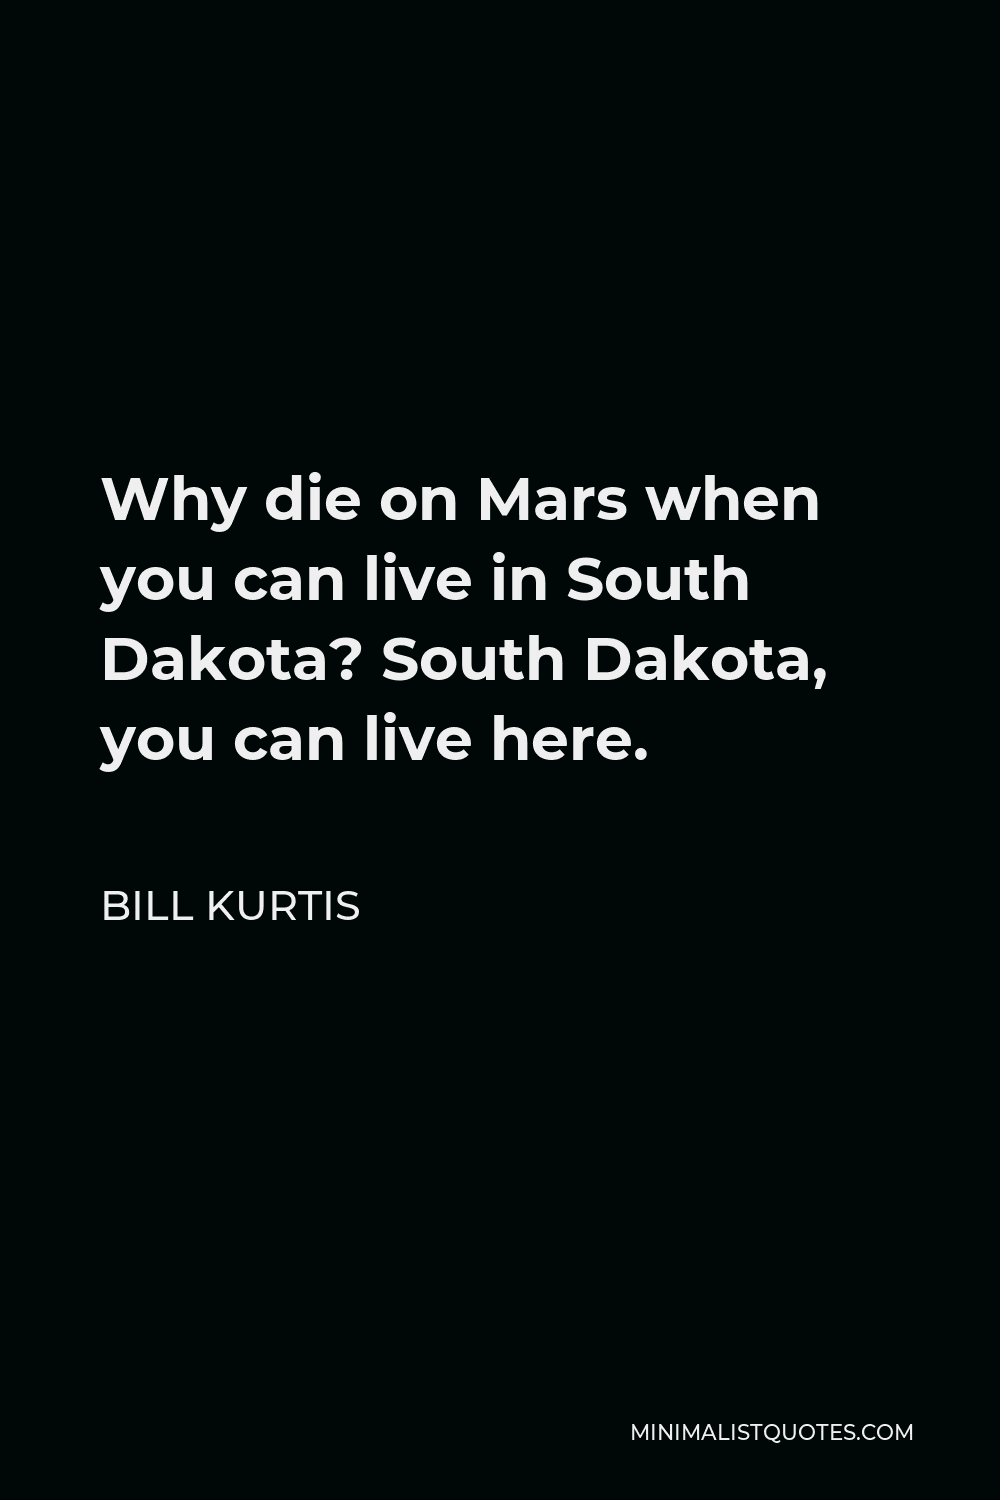 Bill Kurtis Quote - Why die on Mars when you can live in South Dakota? South Dakota, you can live here.